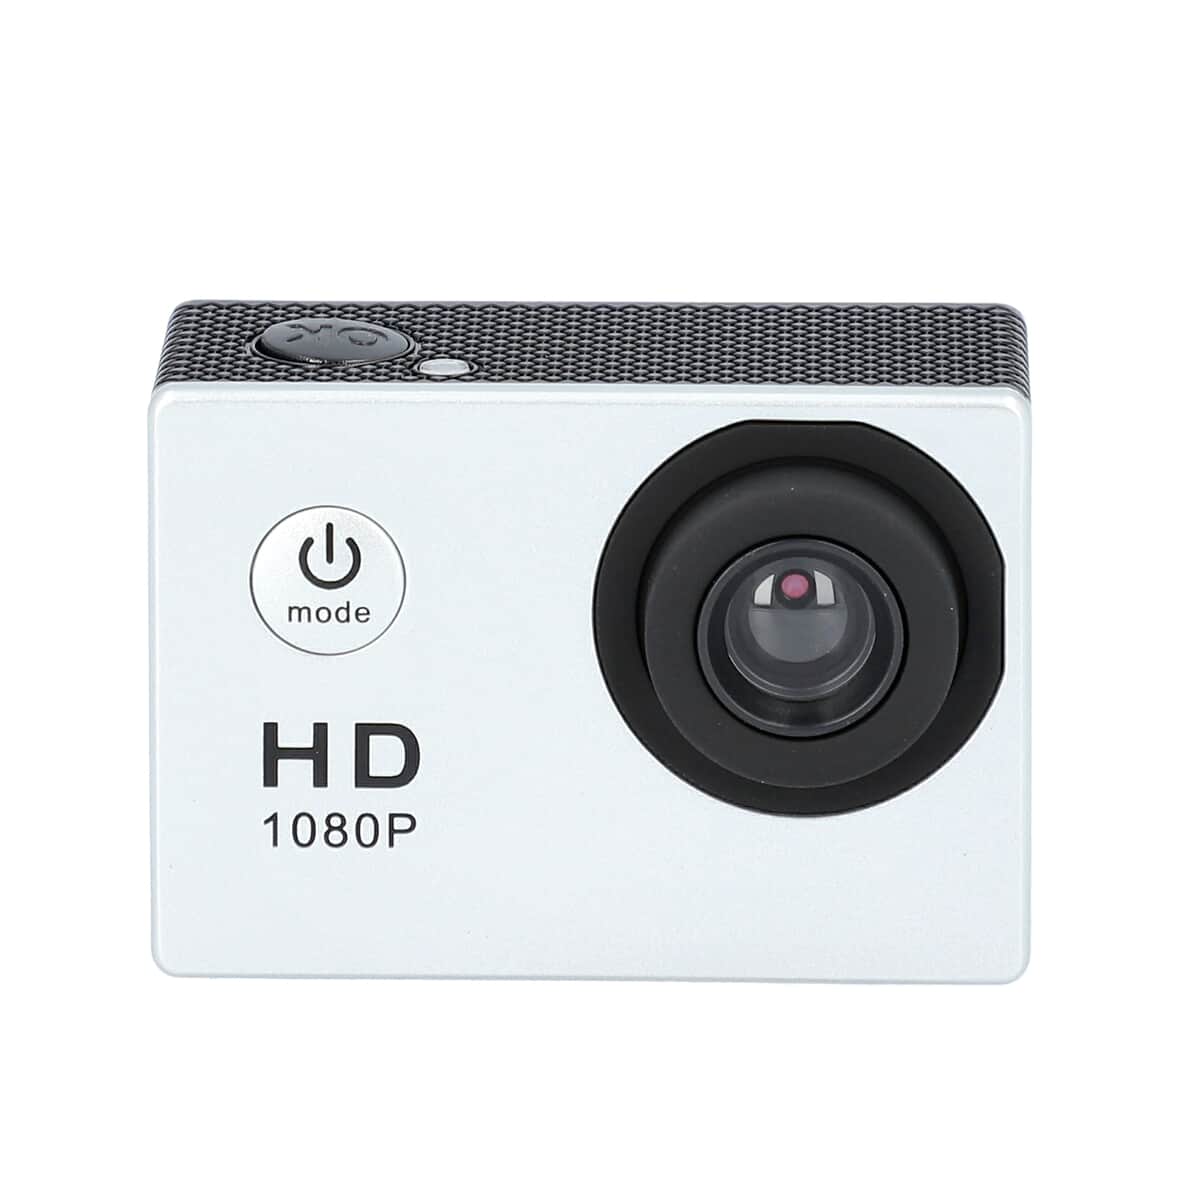 Waterproof 1080P Action Camera with 8GB TF Cards - White image number 0